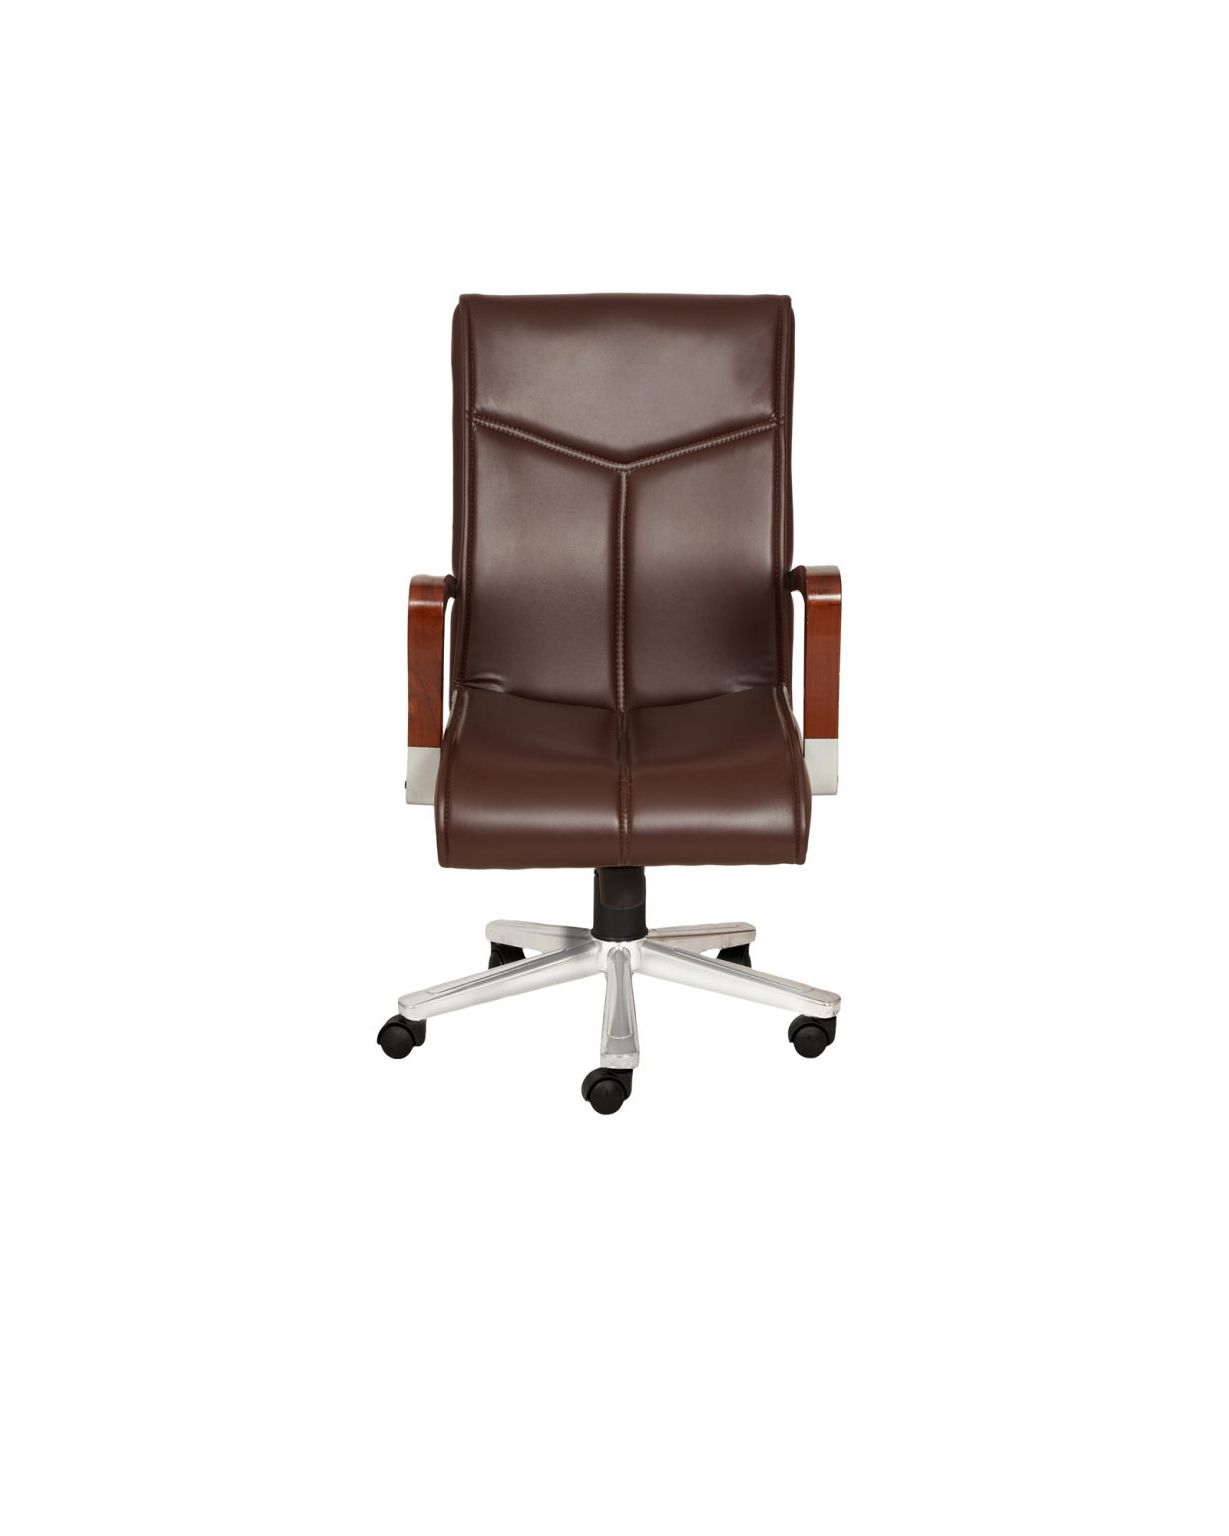 Classic Executive Office Chairs For Popular Classic Leather Executive Office Chair With Wooden Arm (View 12 of 15)